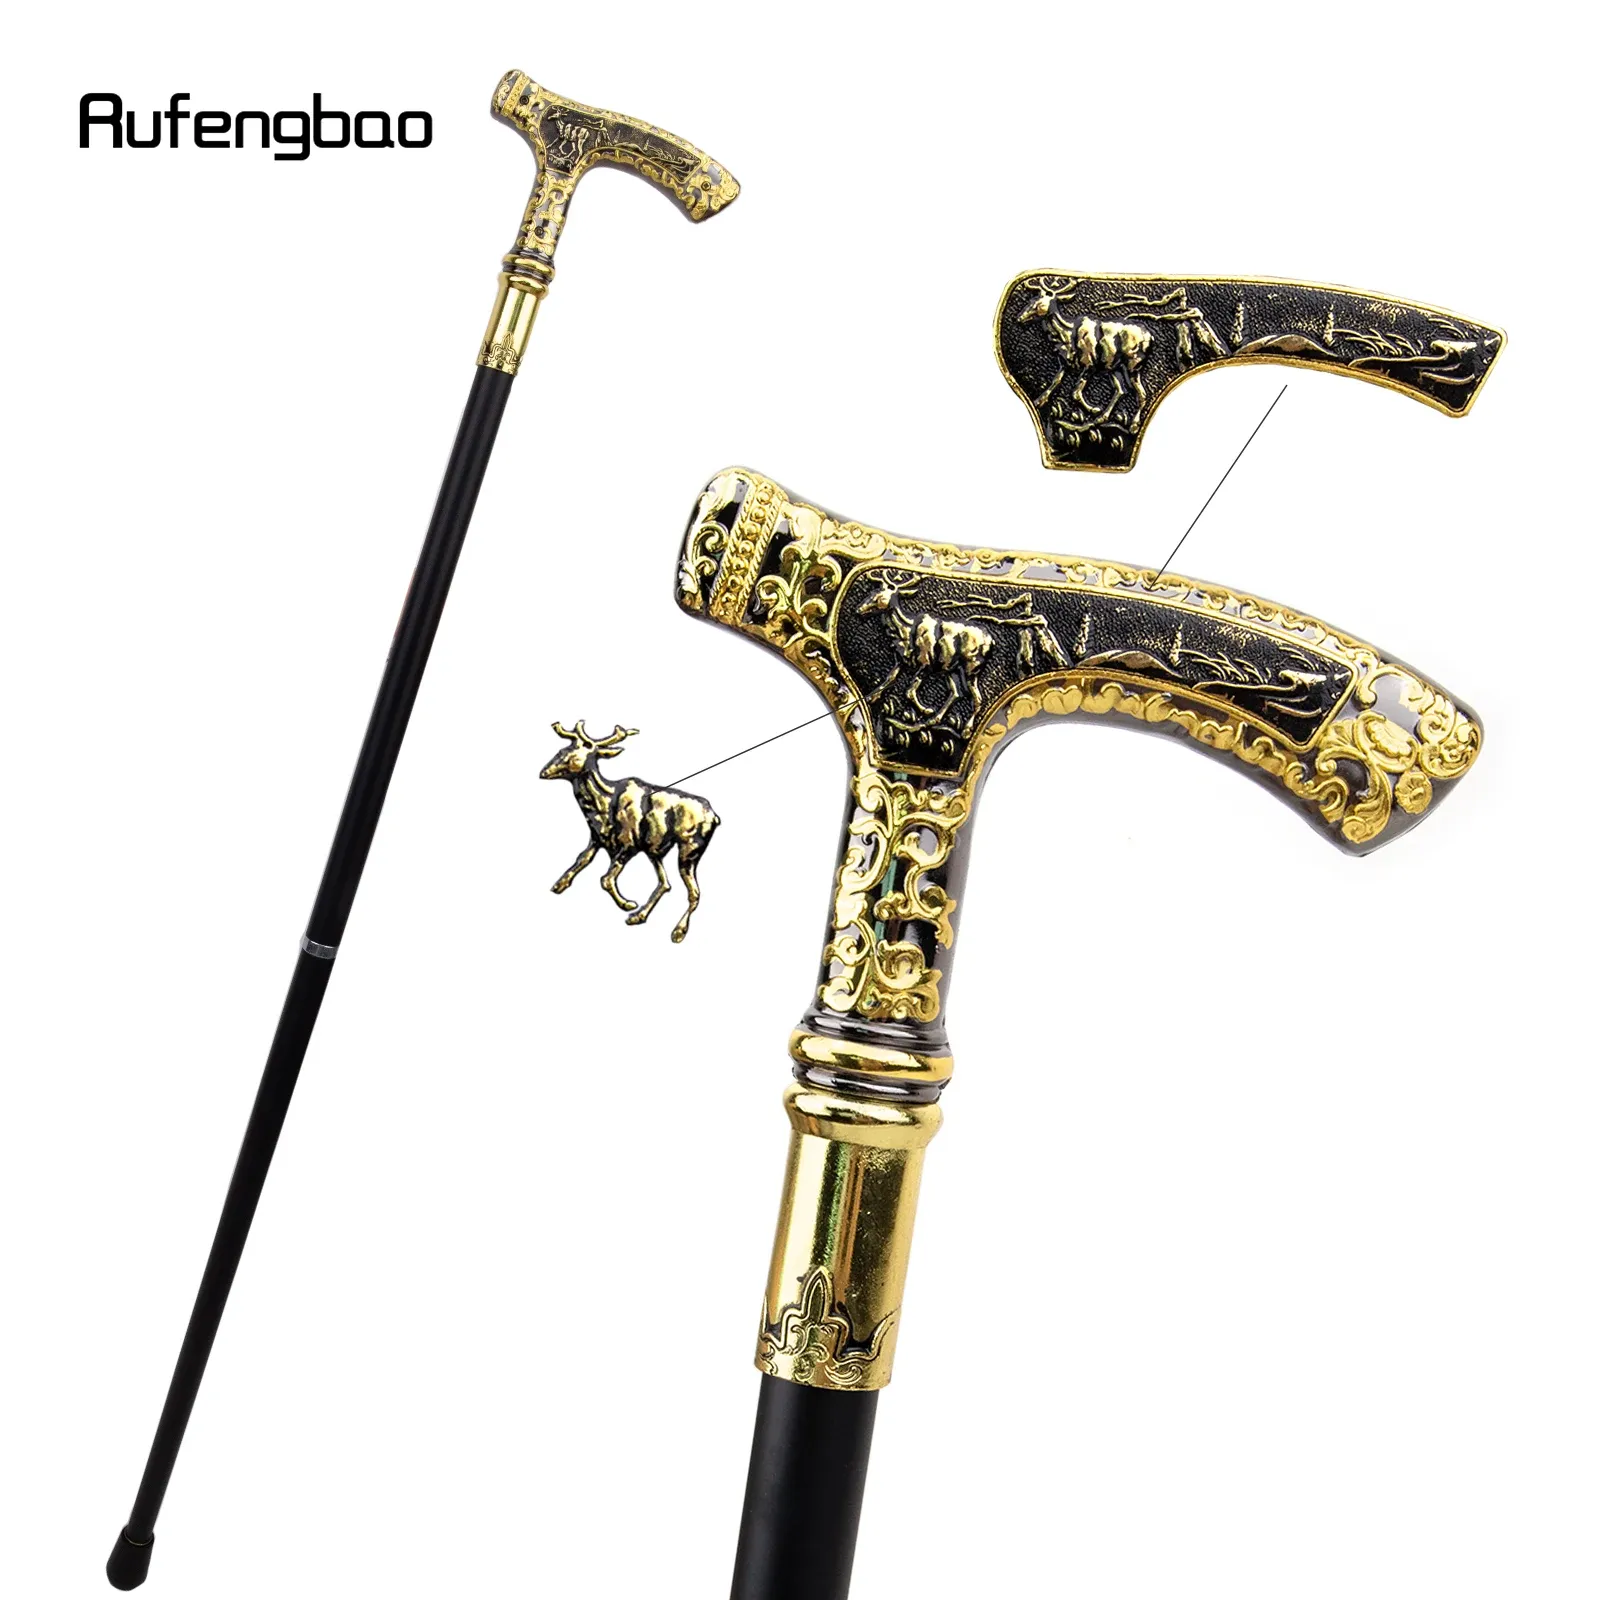 Fashionable Cosplay Cane: 90cm Long, Gold, Black, Animal Inspired With Knob  And Crosser From Rufengbao, $12.07